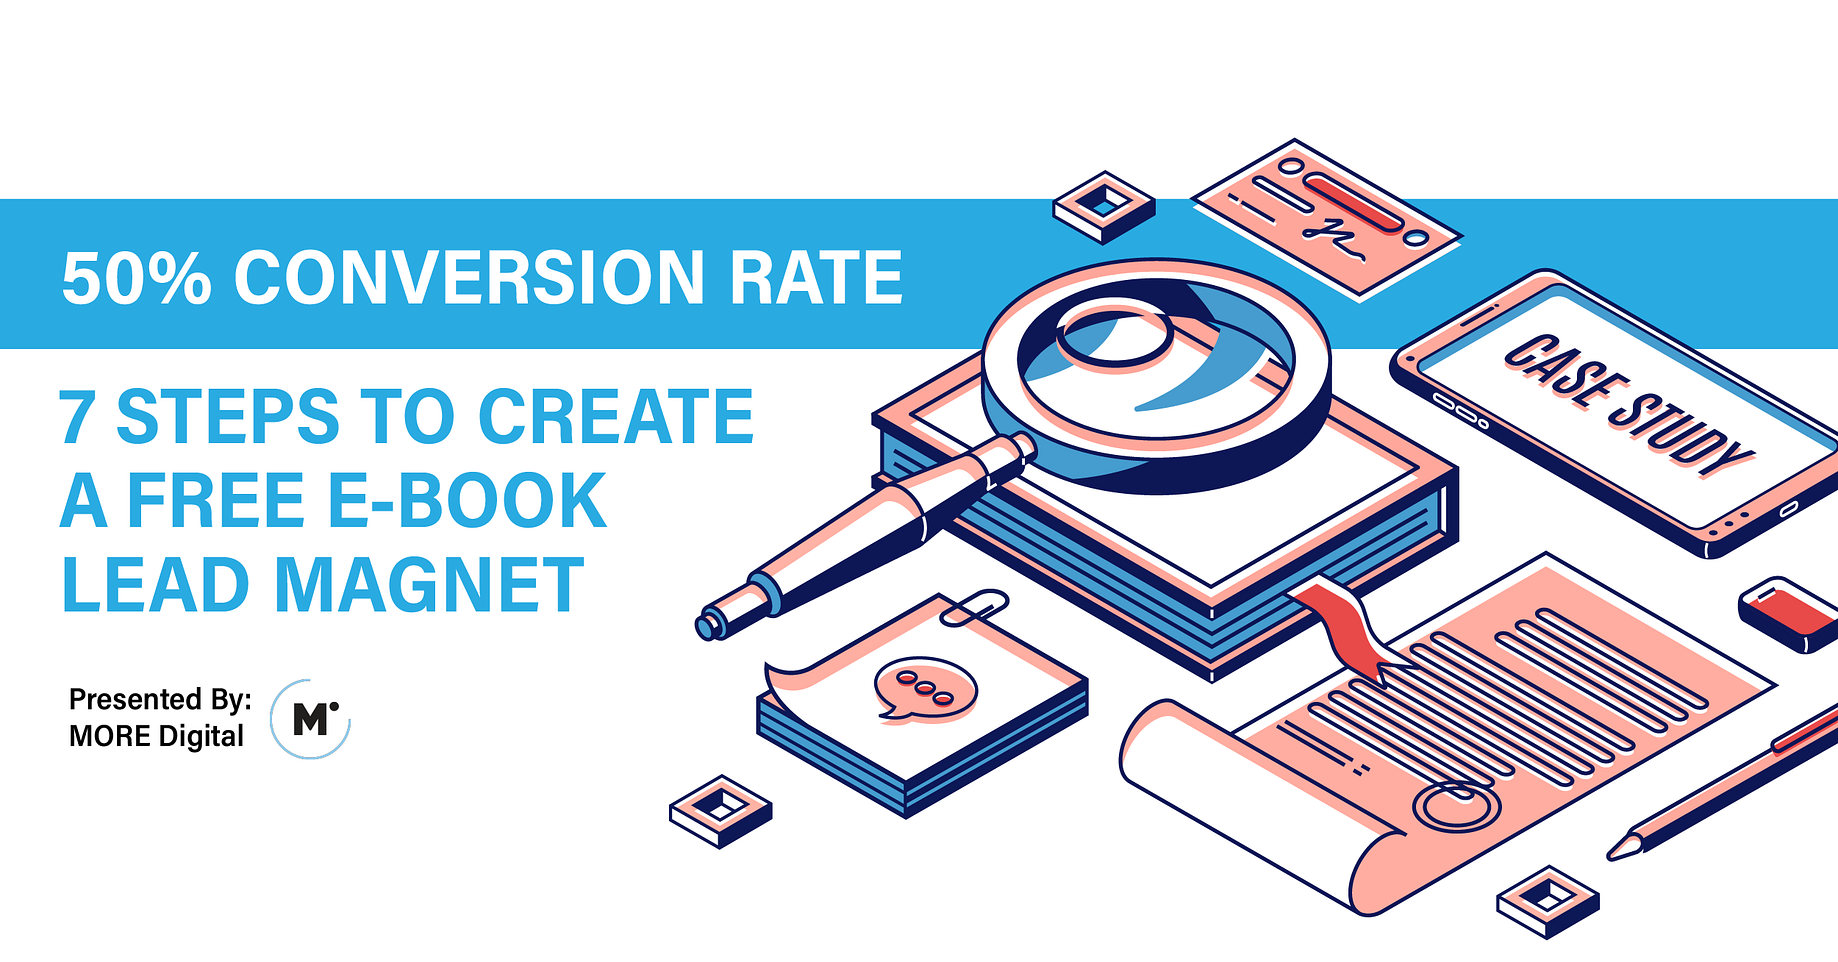 50% Conversion Rate! 7 Steps to Create A Free E-Book Lead Magnet | by MORE  Digital | Medium